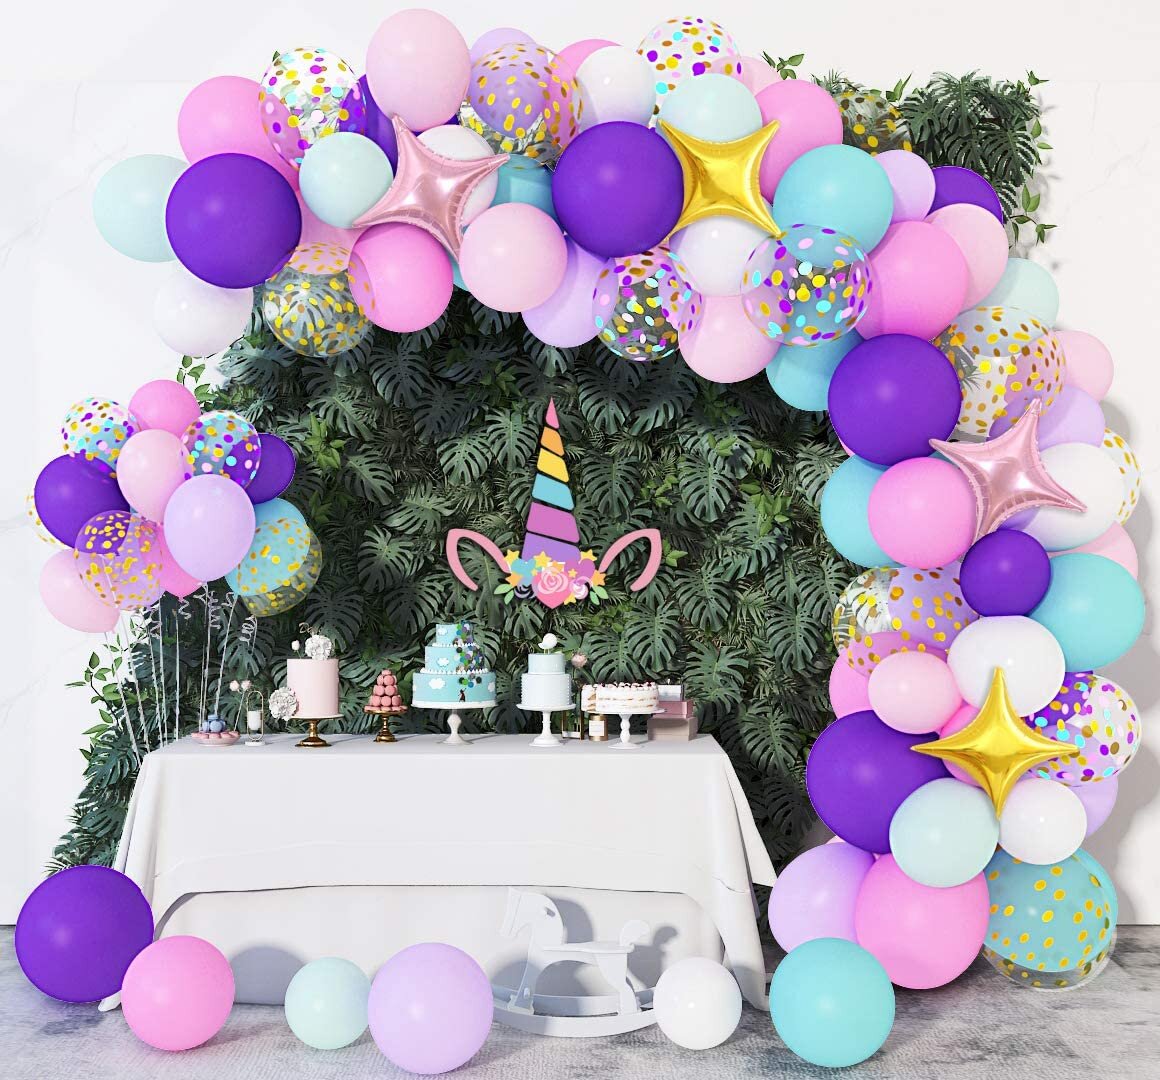 Unicorn Party Supplies/Decorations Kits for Birthday with Cake Topper Confetti